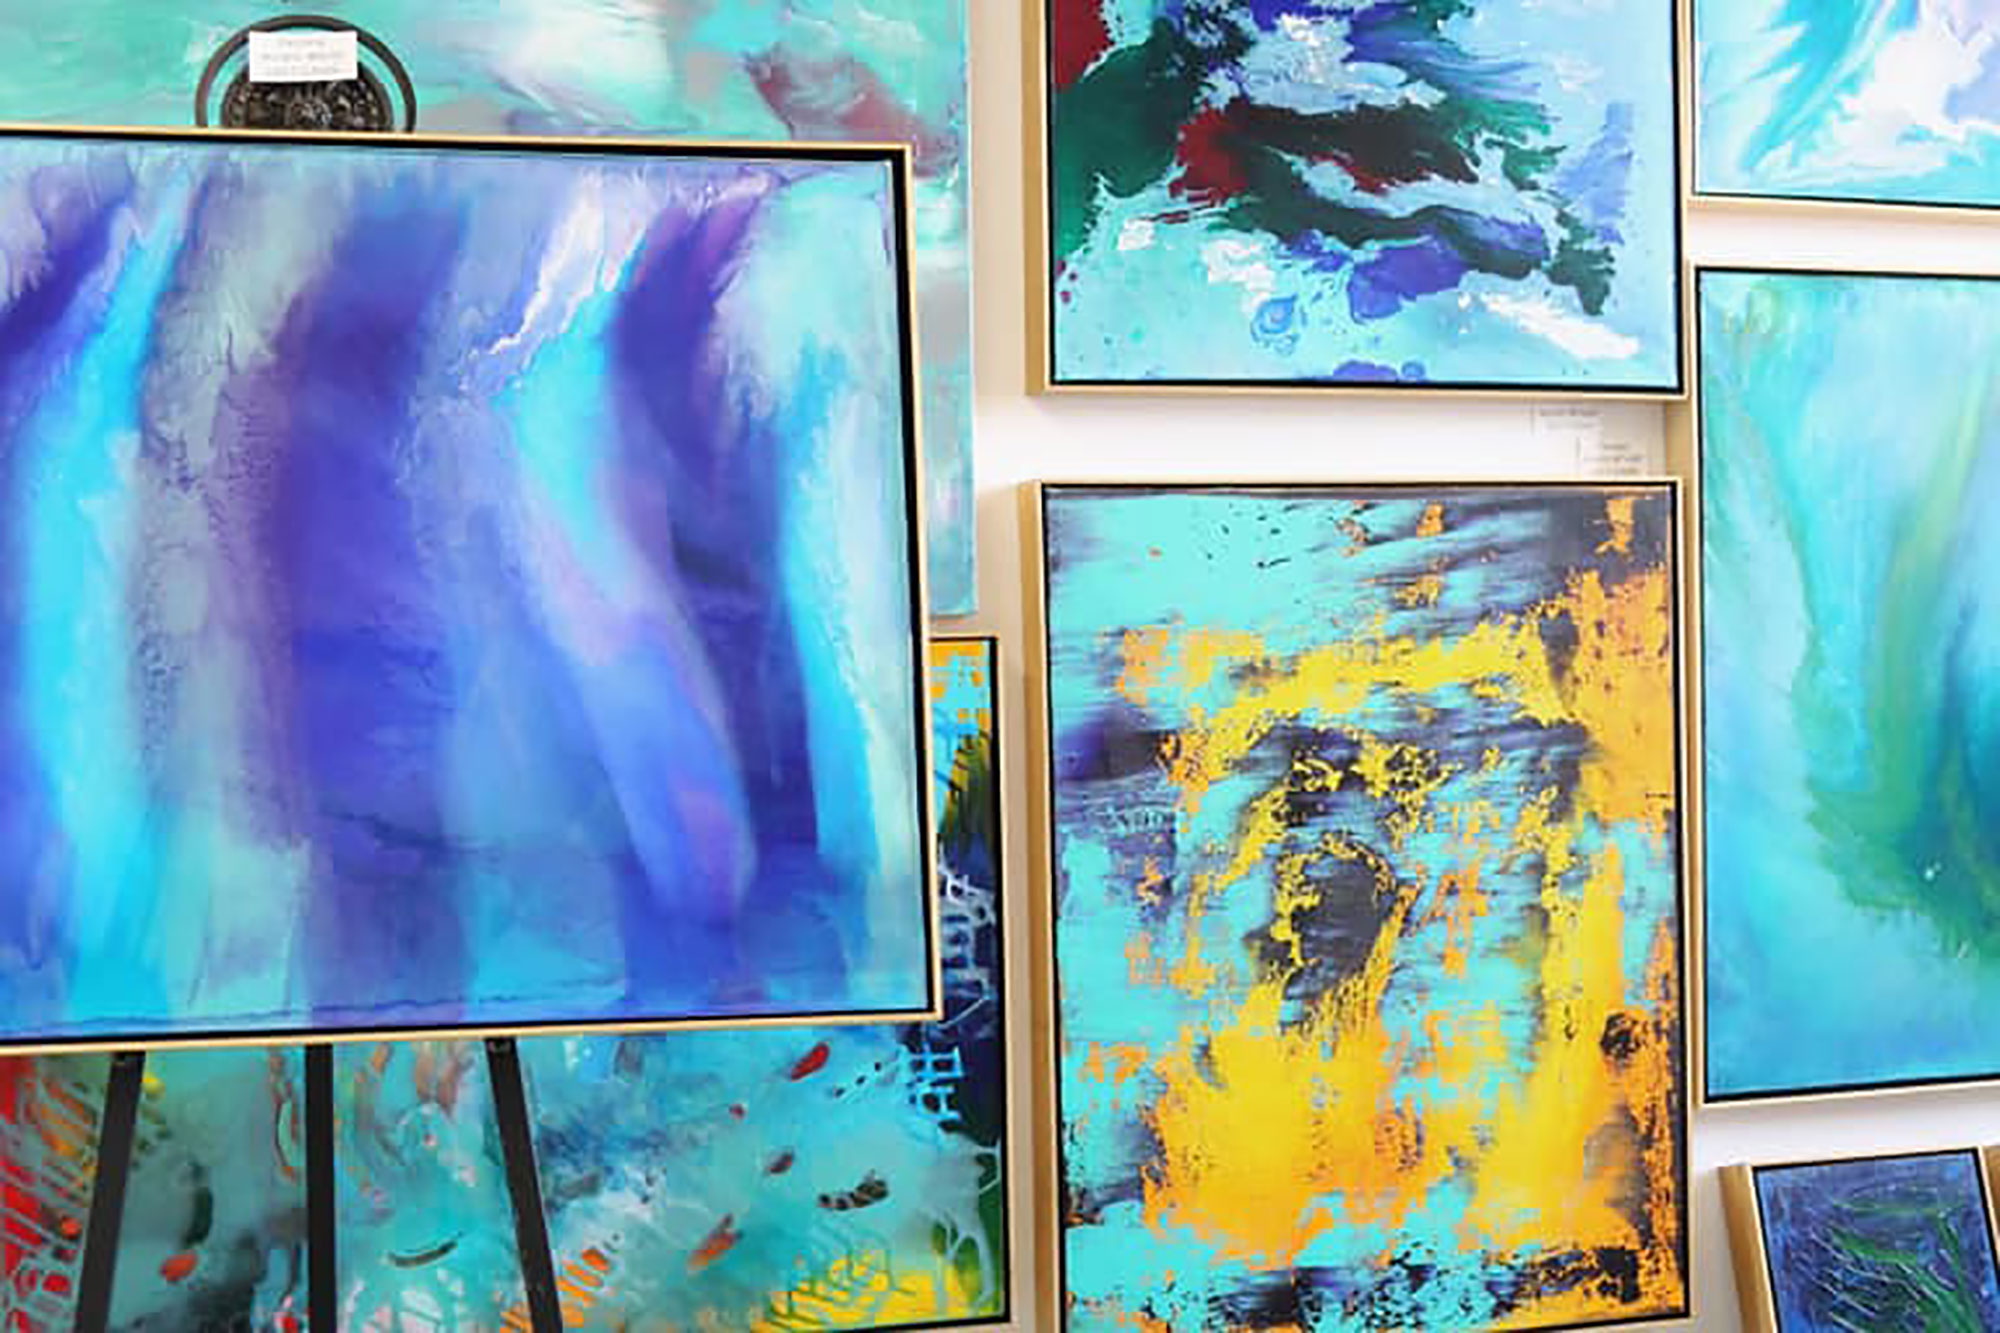 Photo of a wall of canvases painted in organic strokes of blue, teal, and gold, with an easel in the front left.